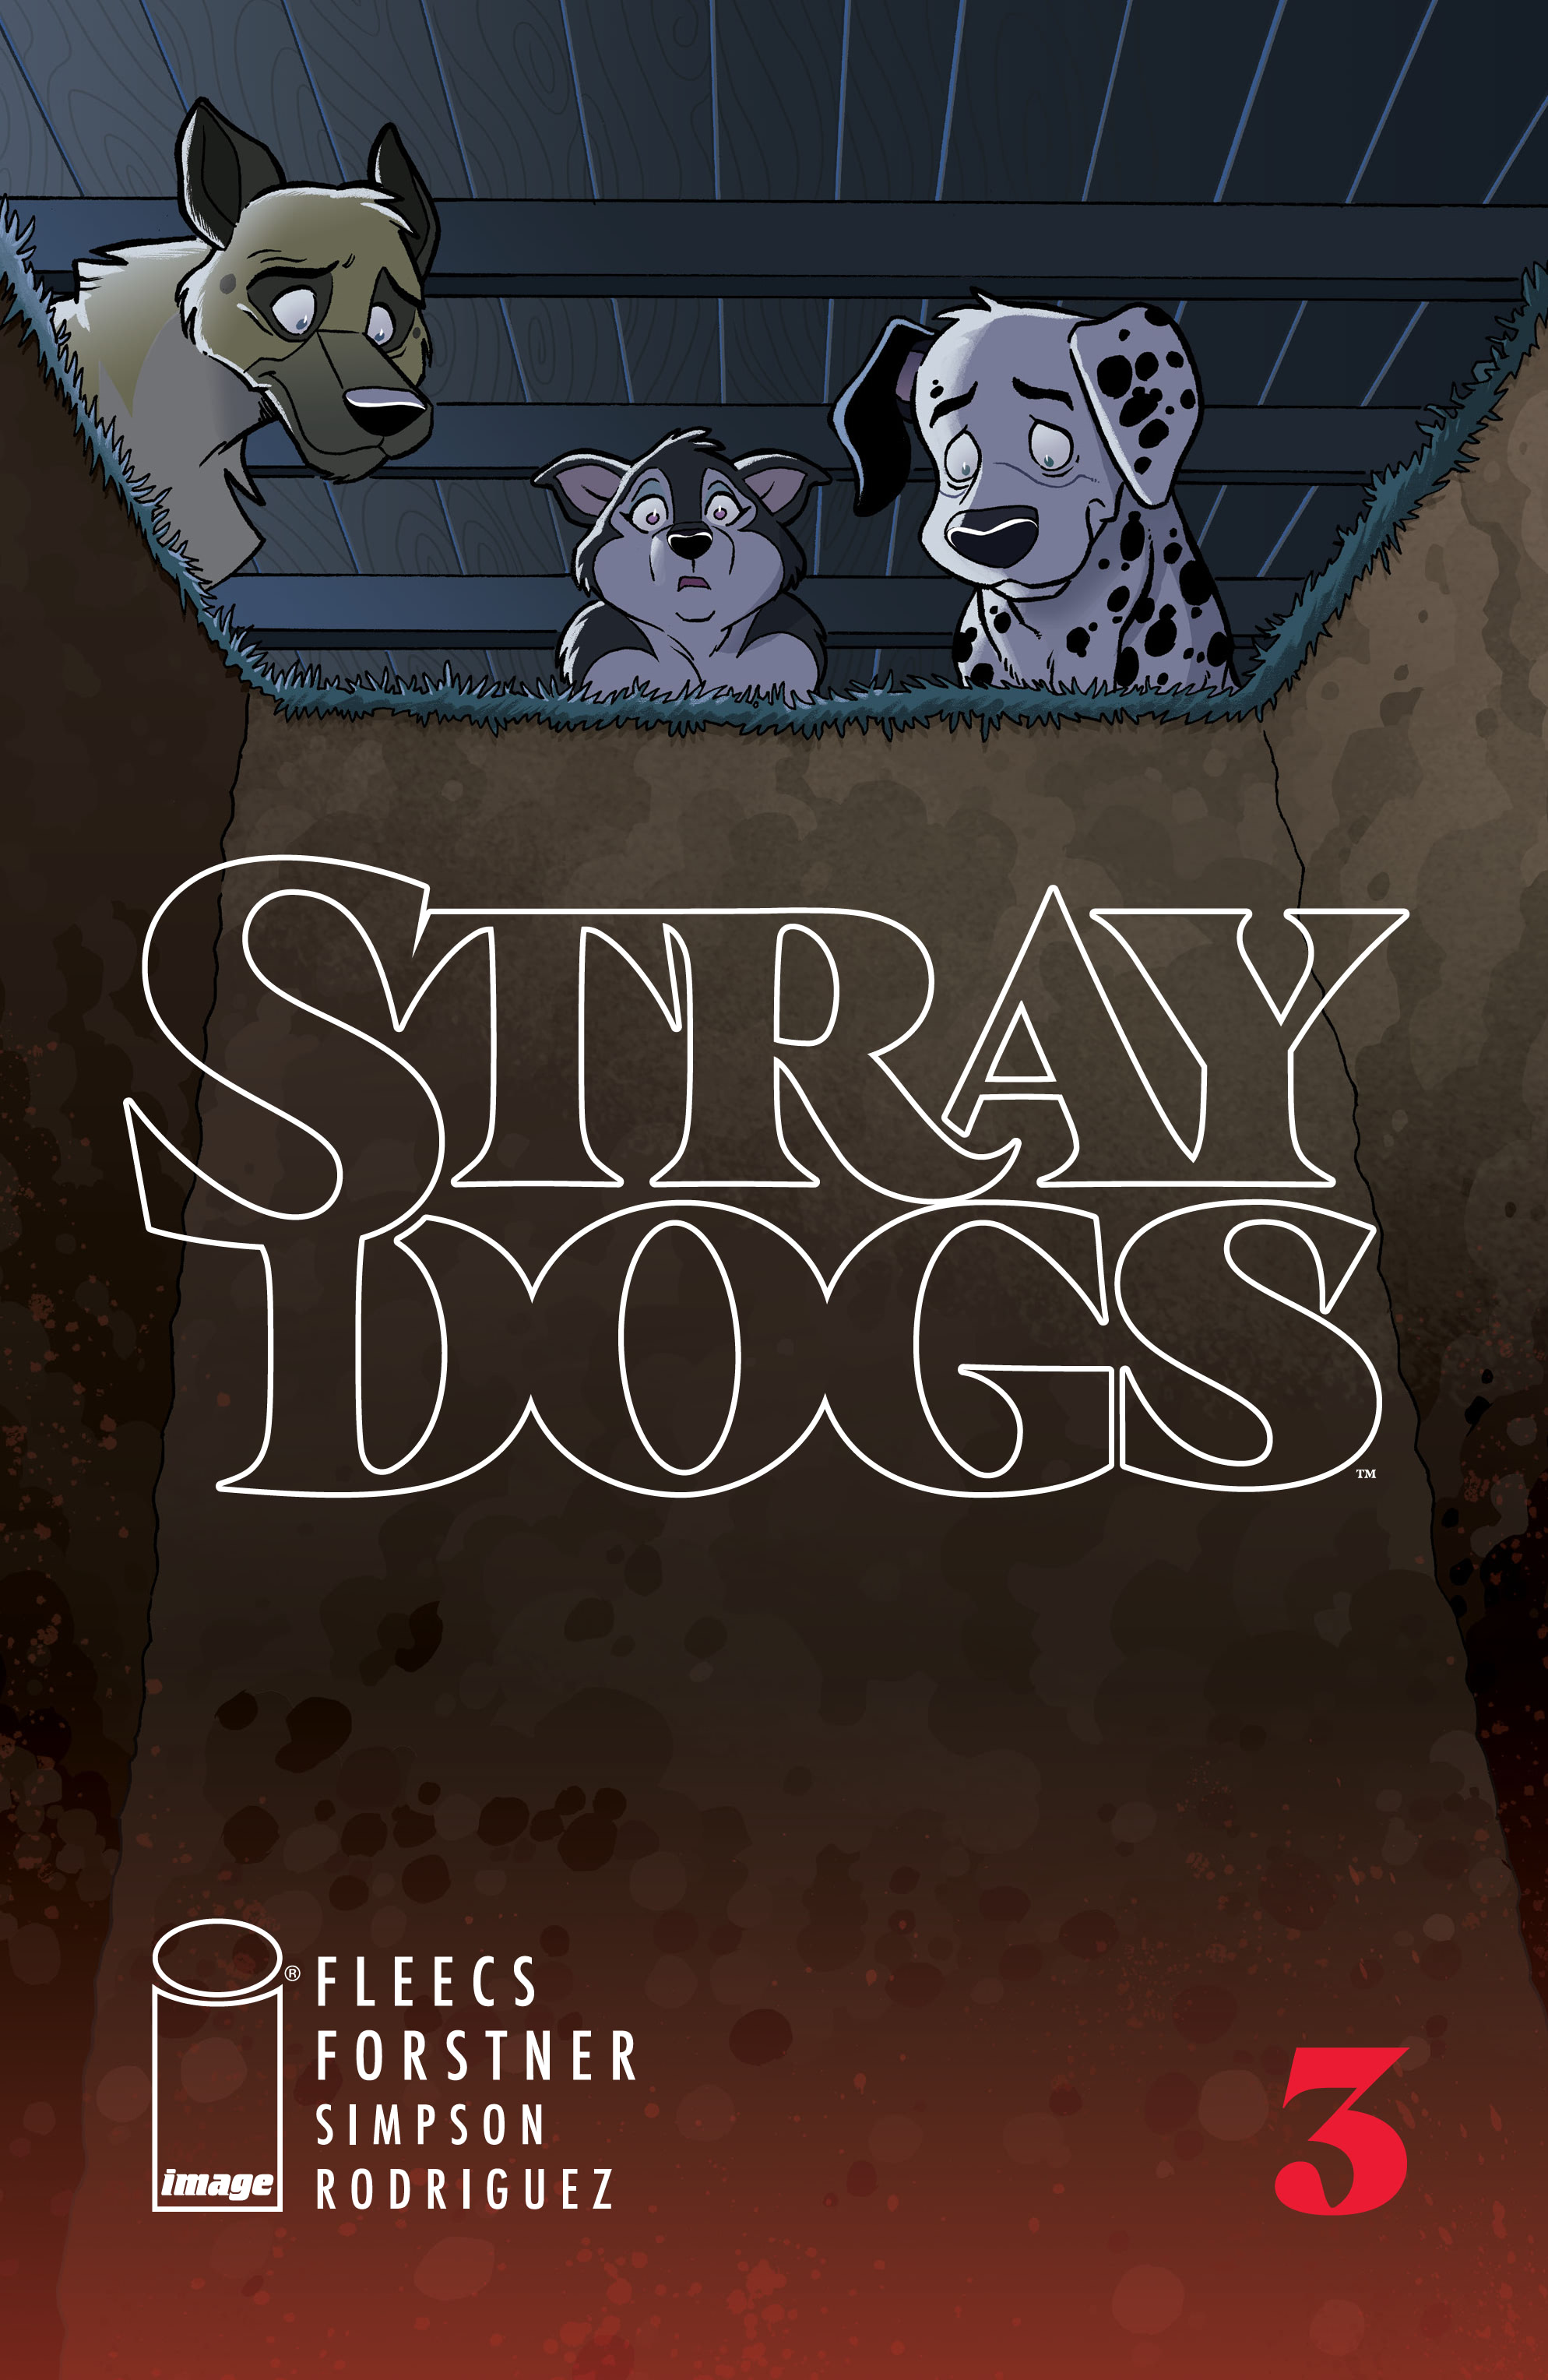 Read online Stray Dogs comic -  Issue #3 - 1